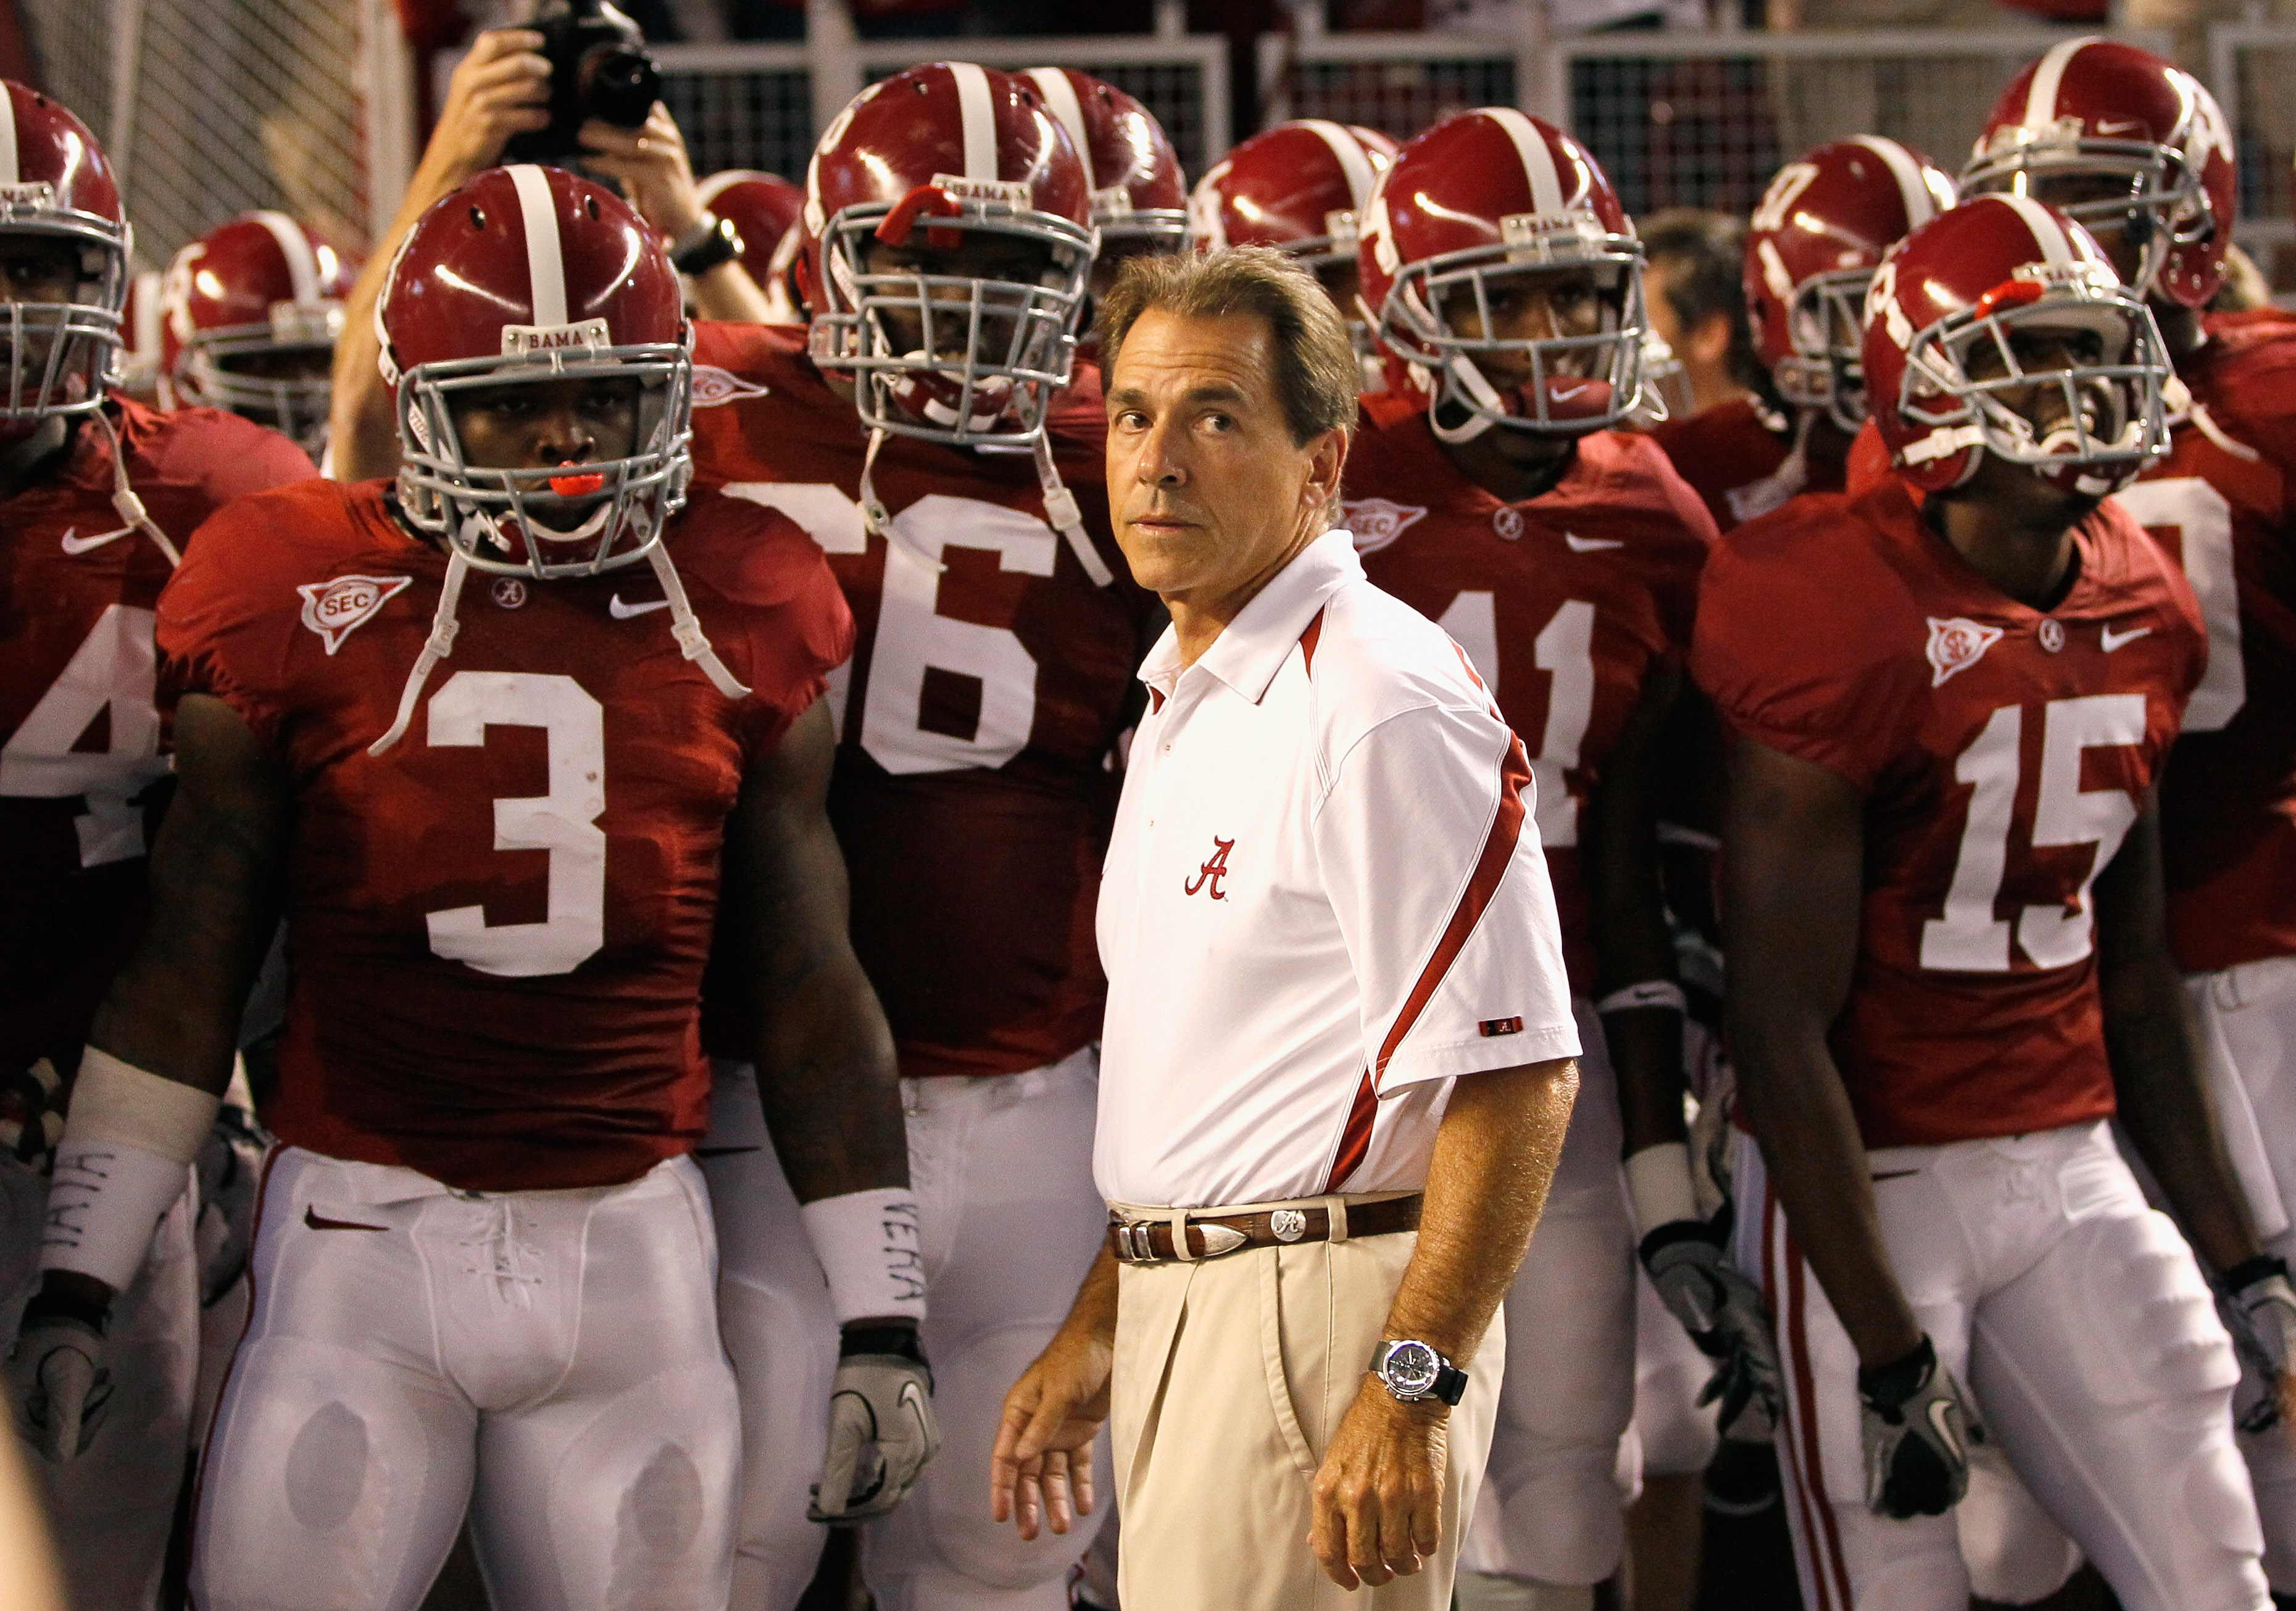 TUSCALOOSA, AL - OCTOBER 02:  Head coach Nick Saban of the Alabama Crimson Tide leads his team onto the field to face the Florida Gators at Bryant-Denny Stadium on October 2, 2010 in Tuscaloosa, Alabama.  (Photo by Kevin C. Cox/Getty Images)